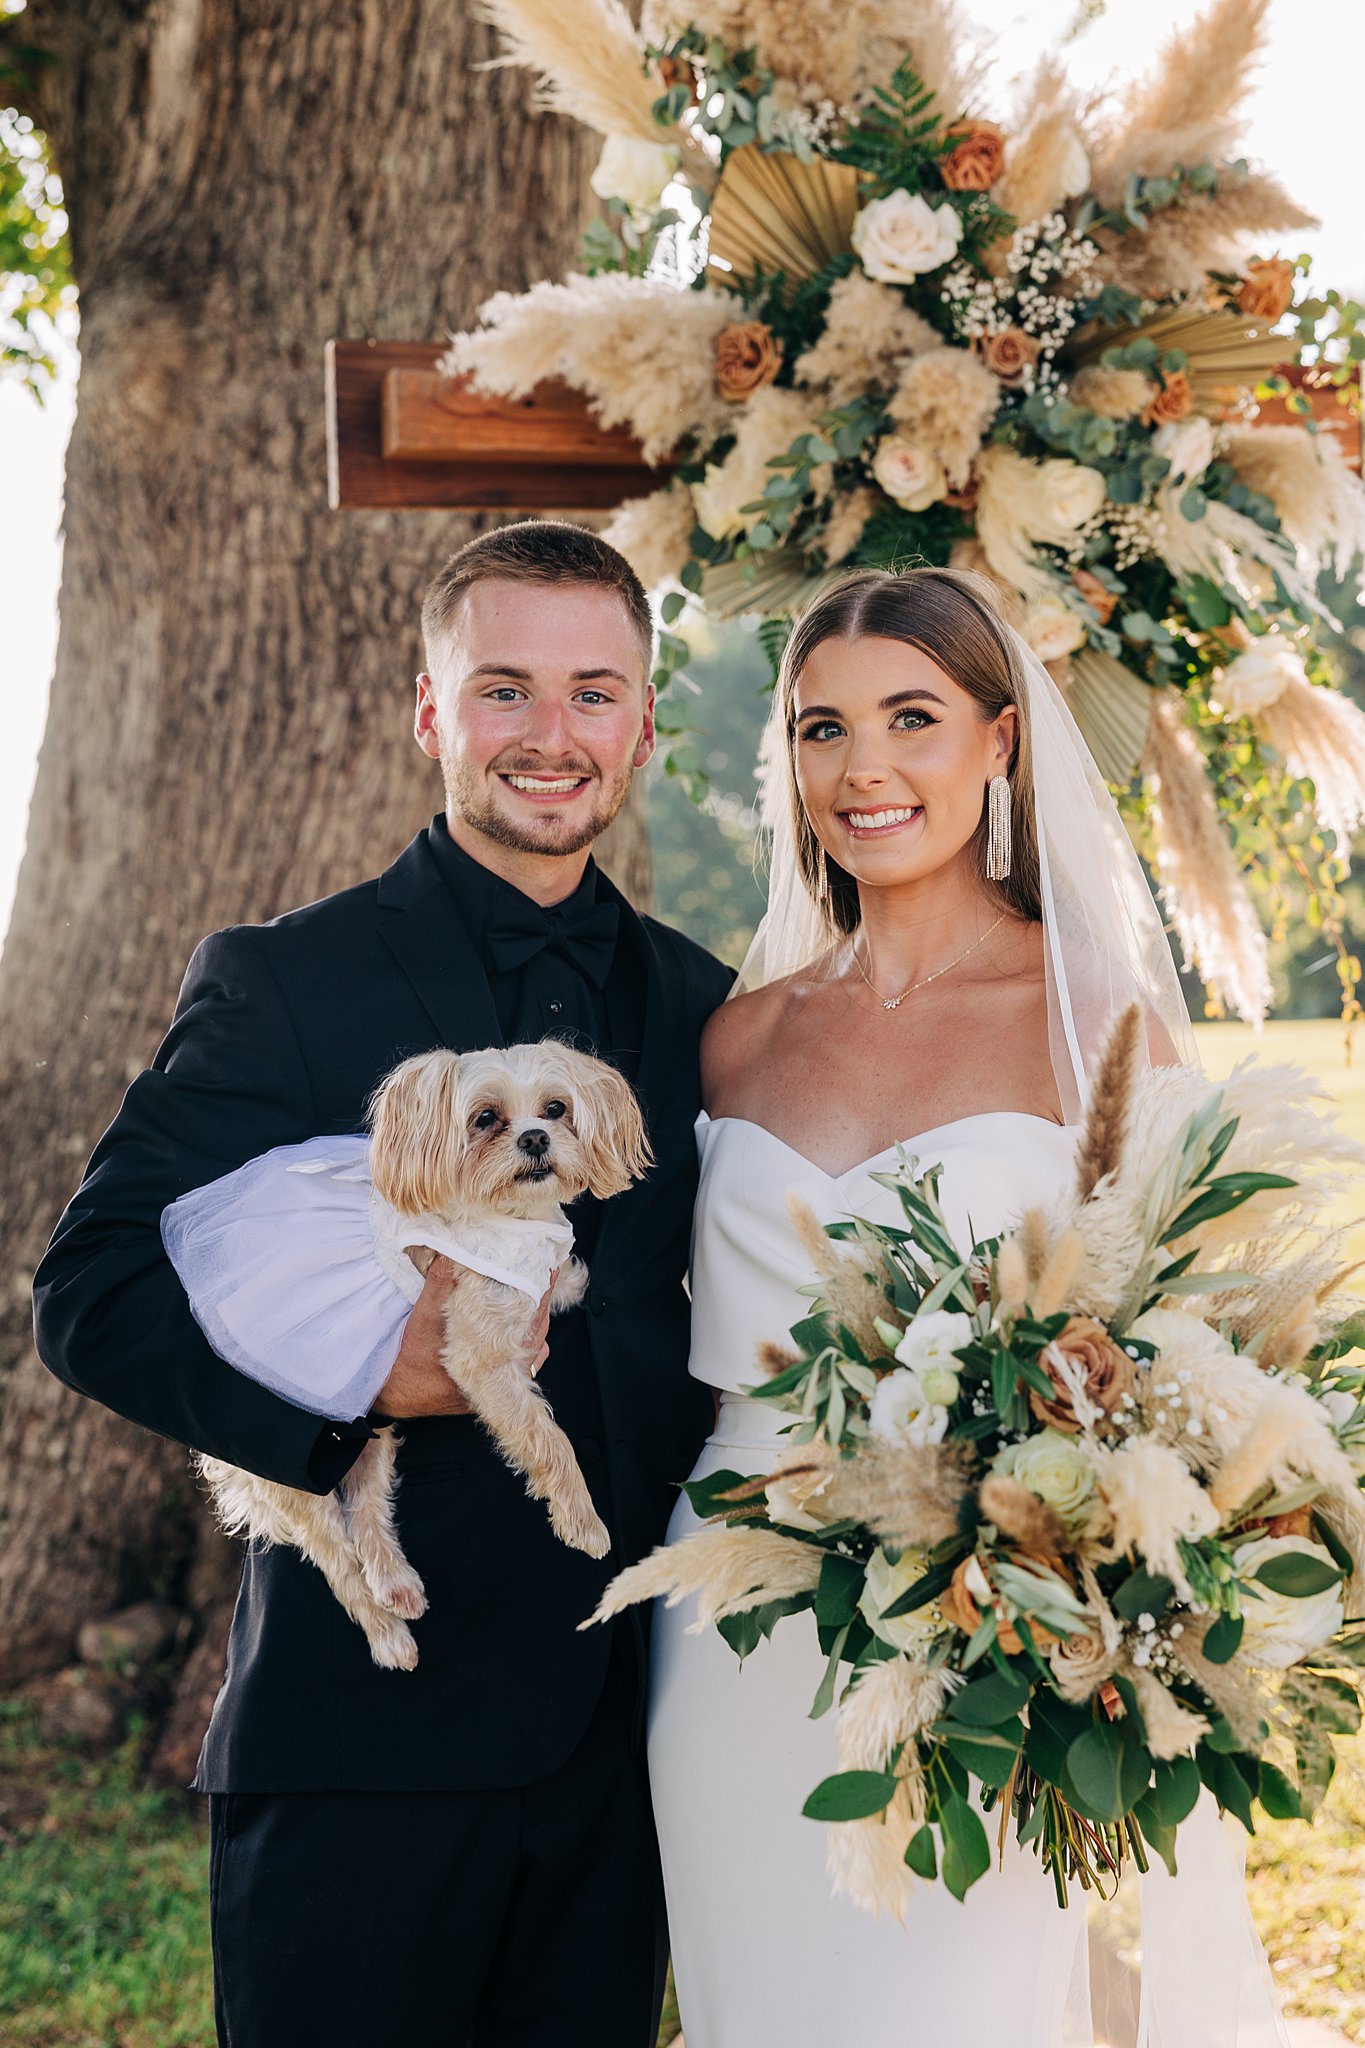 A groom in a black suit holds a dog in a white dress while standing with his bride holding her large bouquet